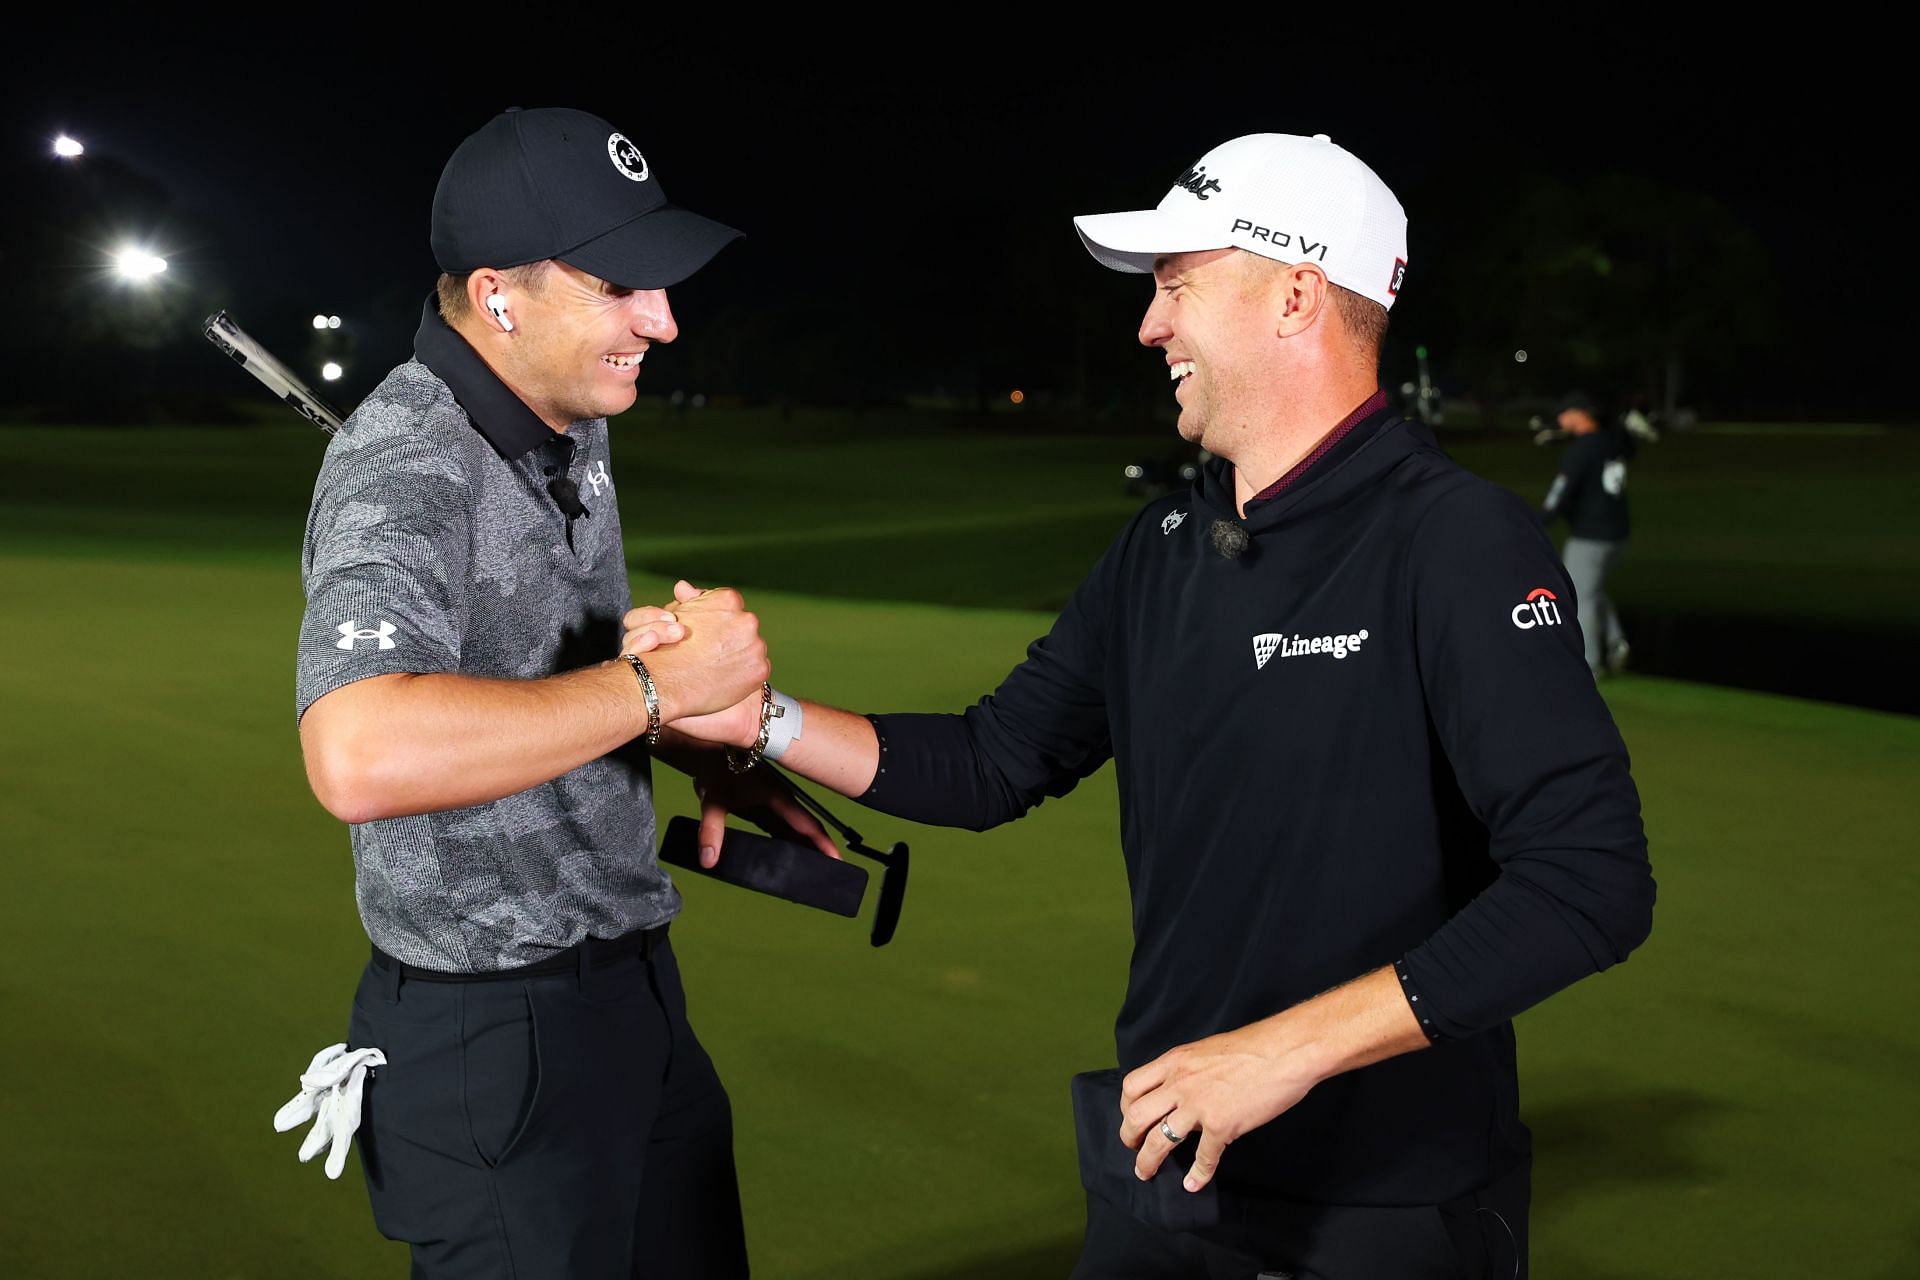 “I think our games complement each other really well” - Justin Thomas ...